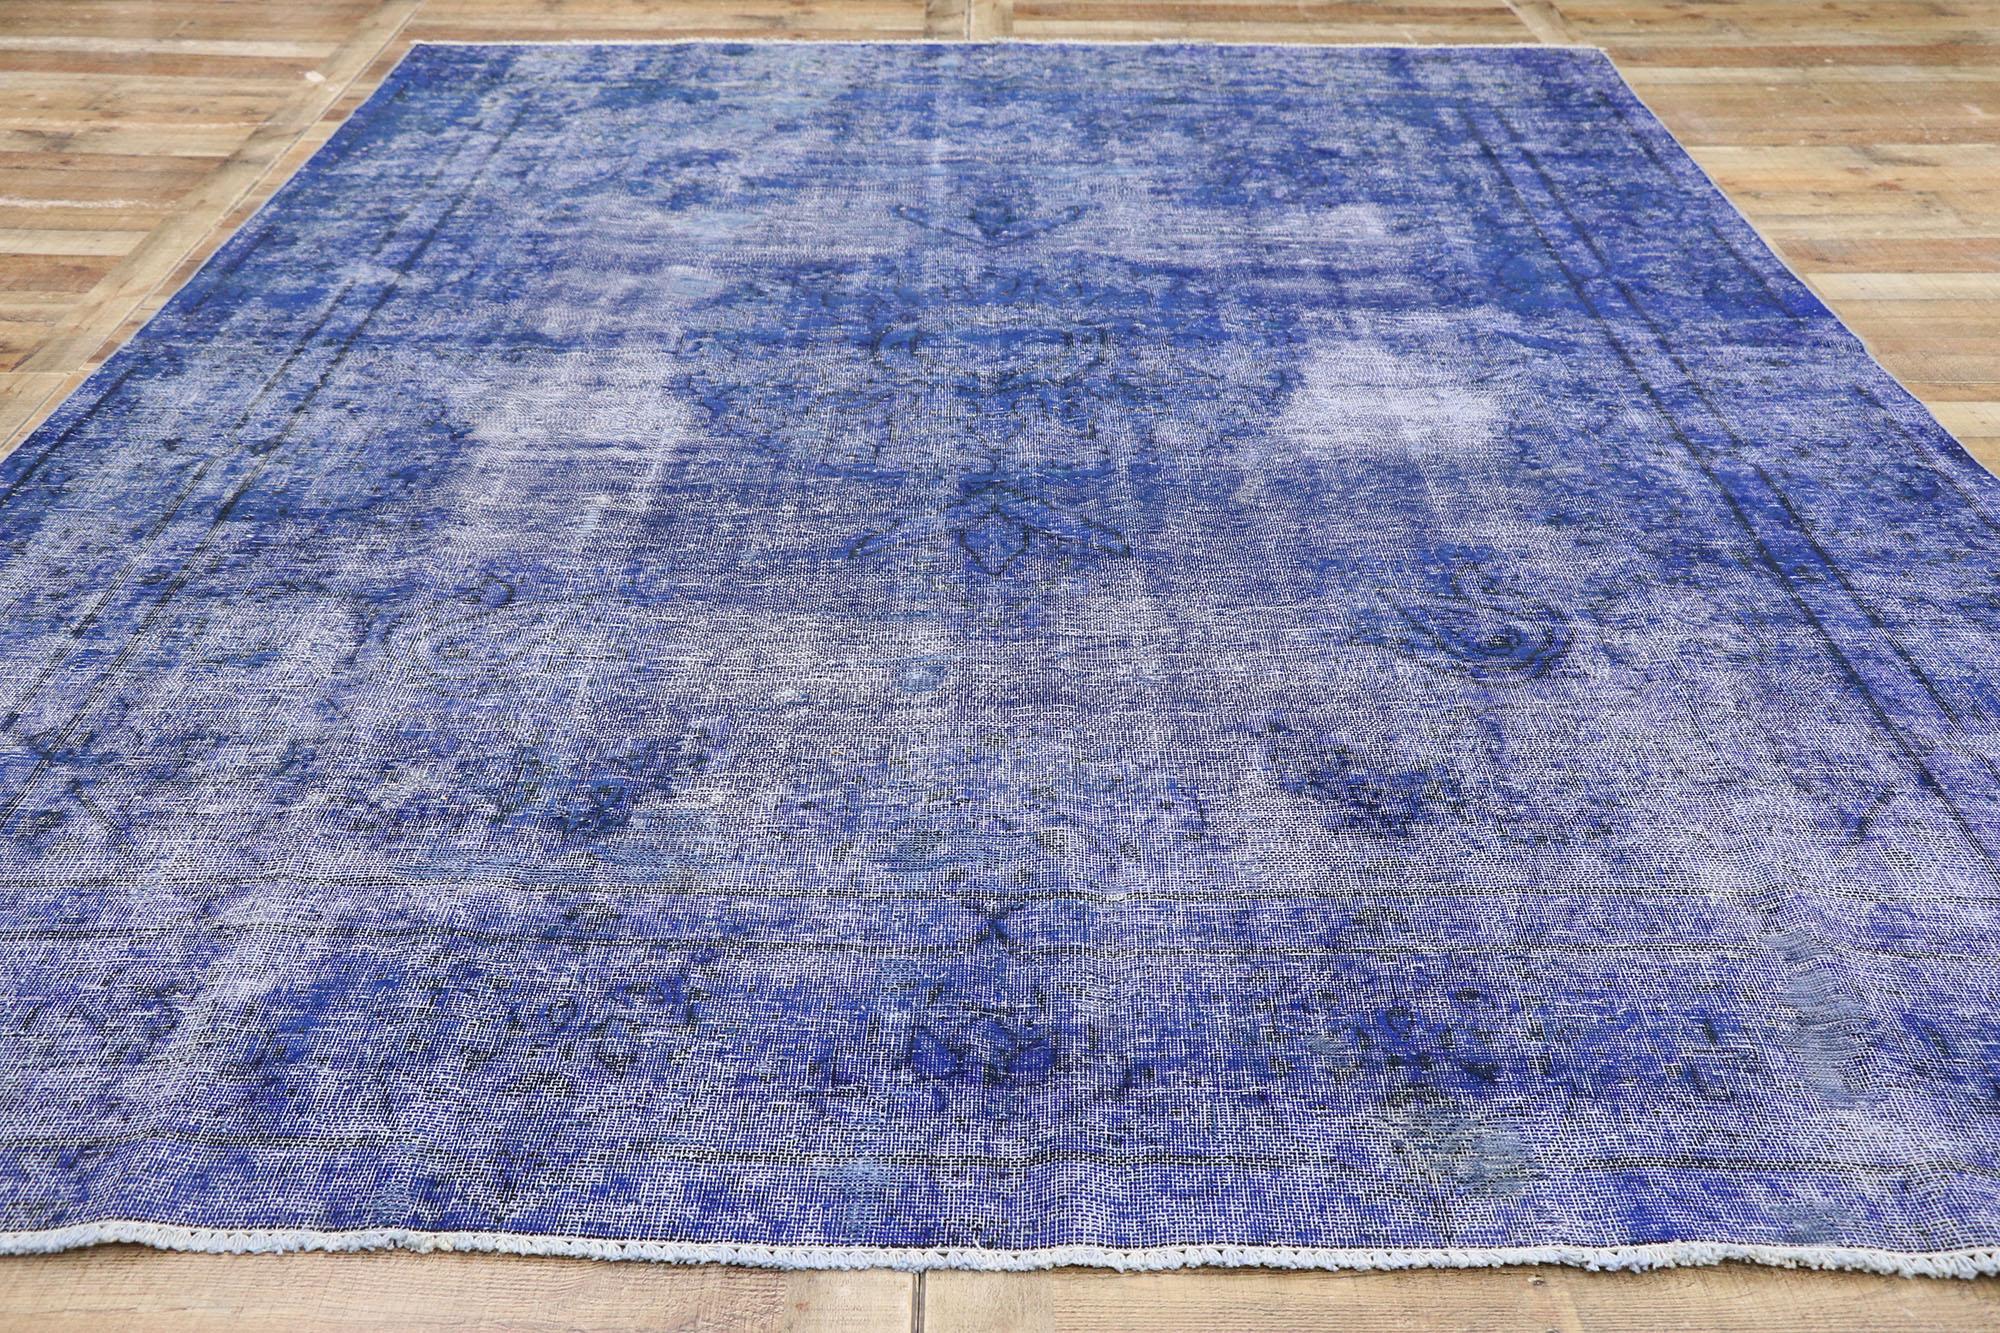 Wool Distressed Vintage Blue Overdyed Persian Rug with Modern Style